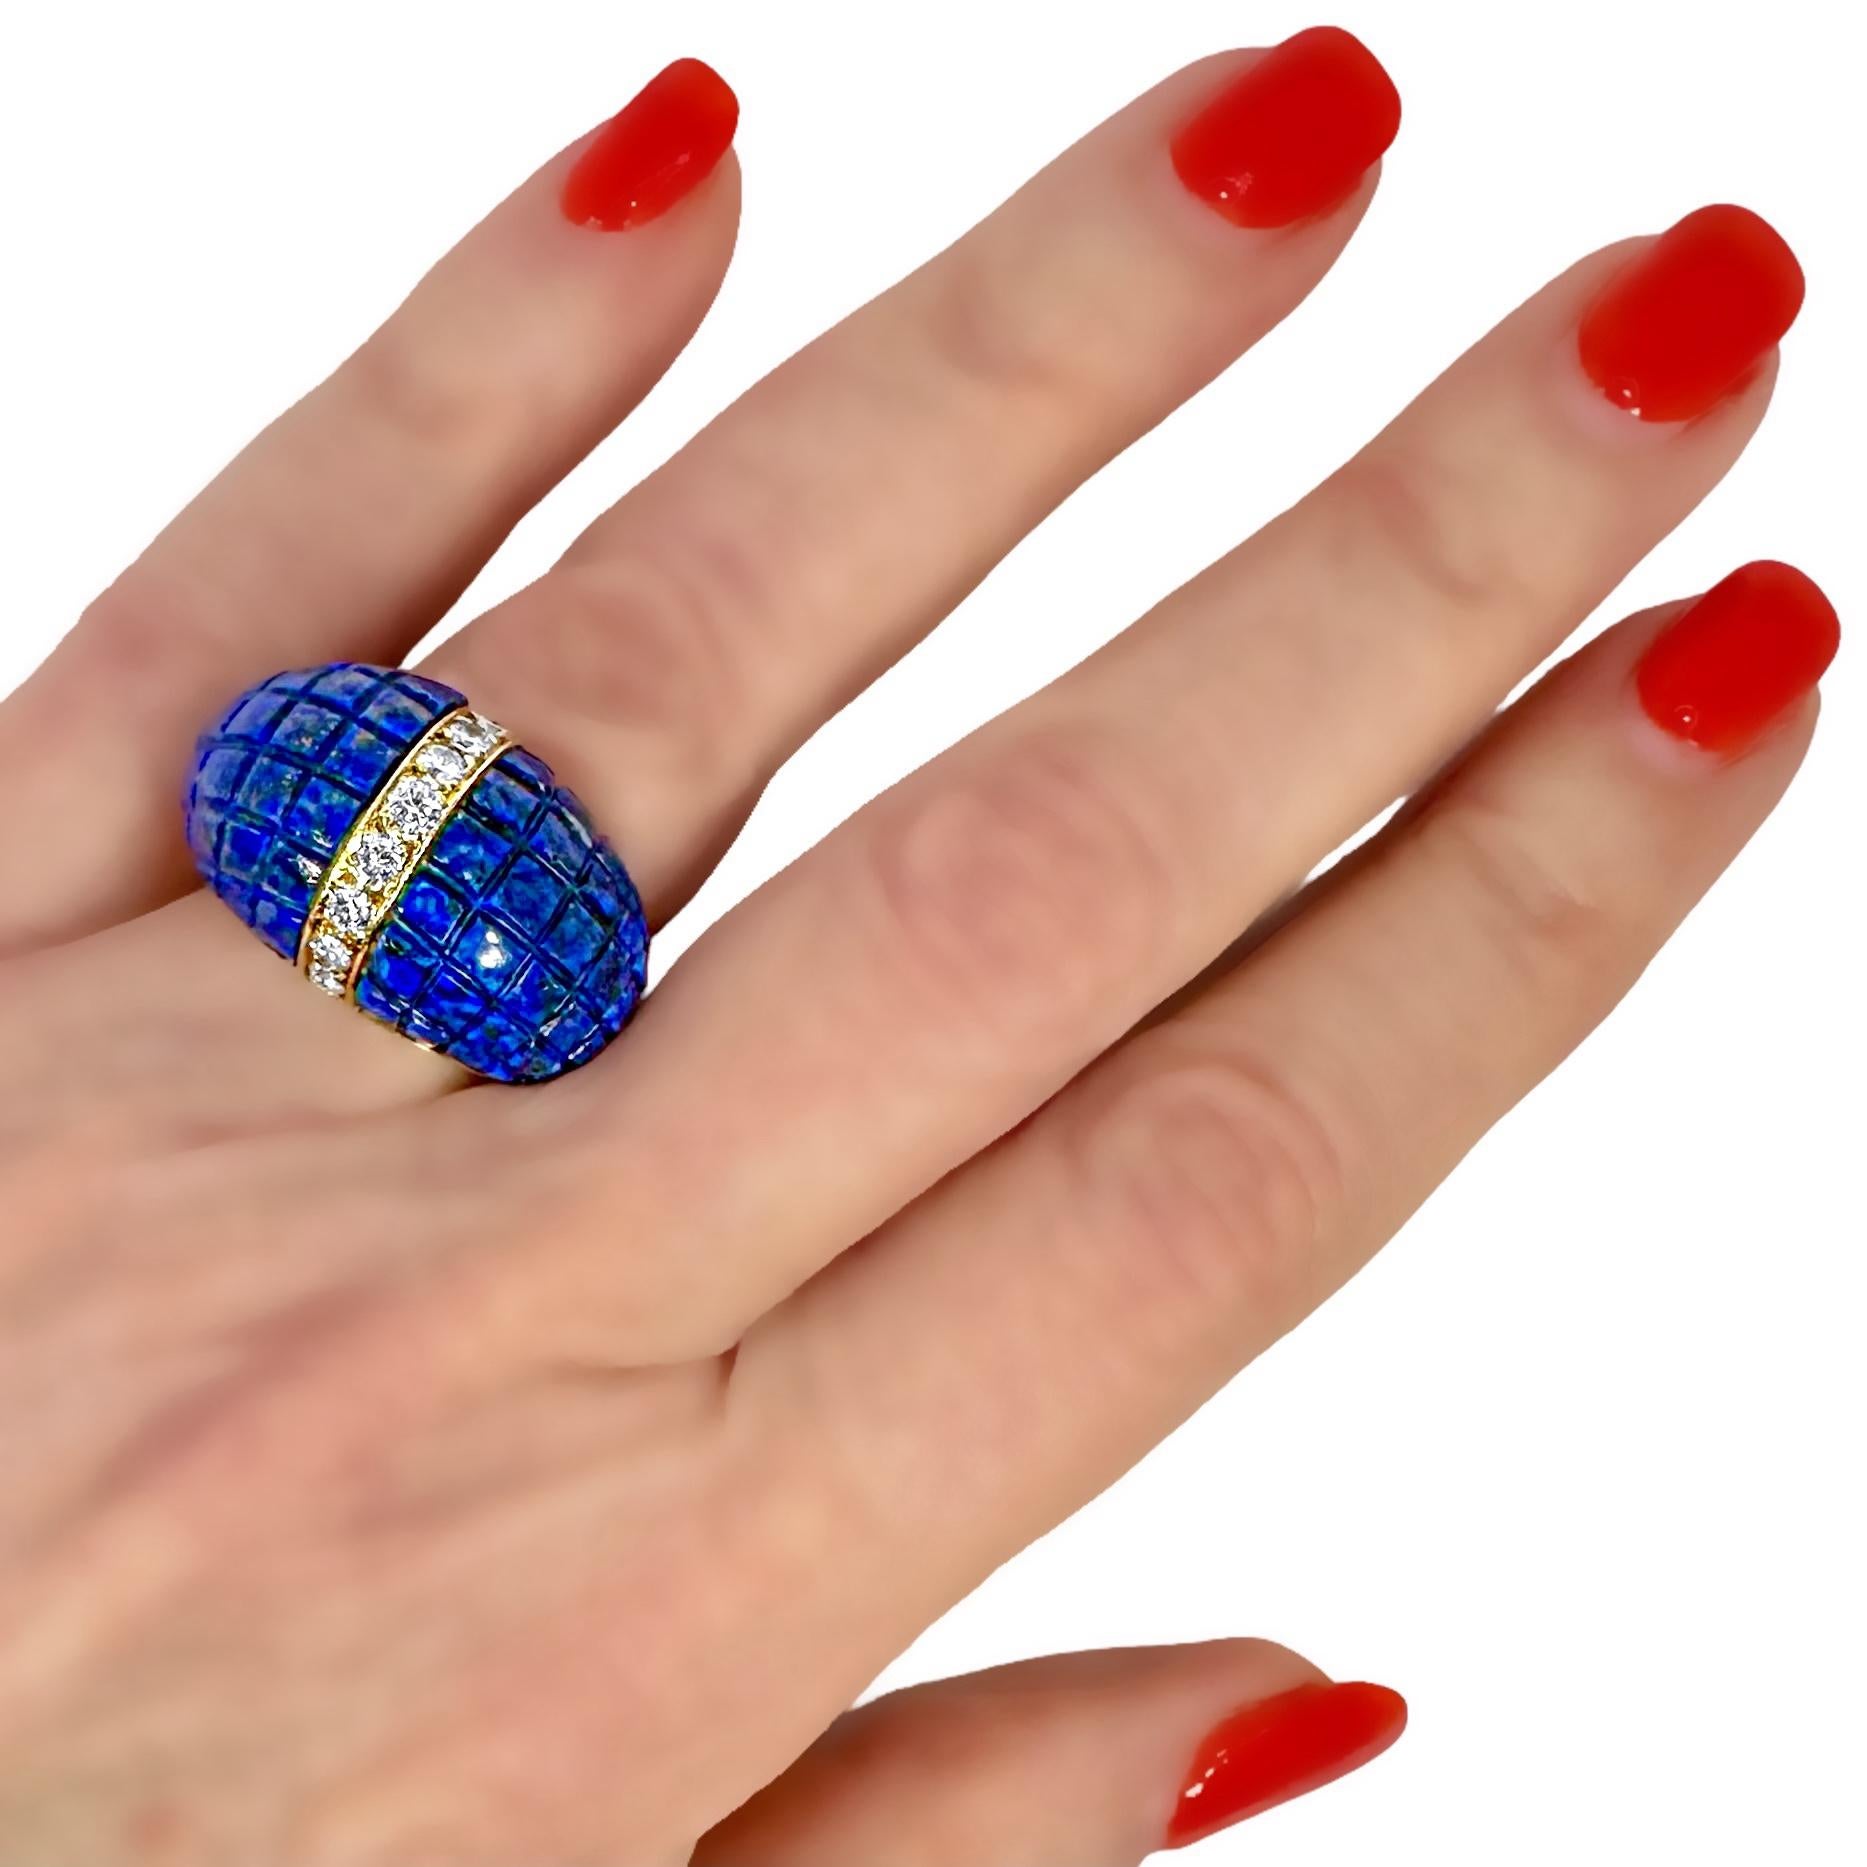 Exquisitely Crafted Italian 18K Yellow Gold, Lapis Lazuli, and Diamond Ring For Sale 3